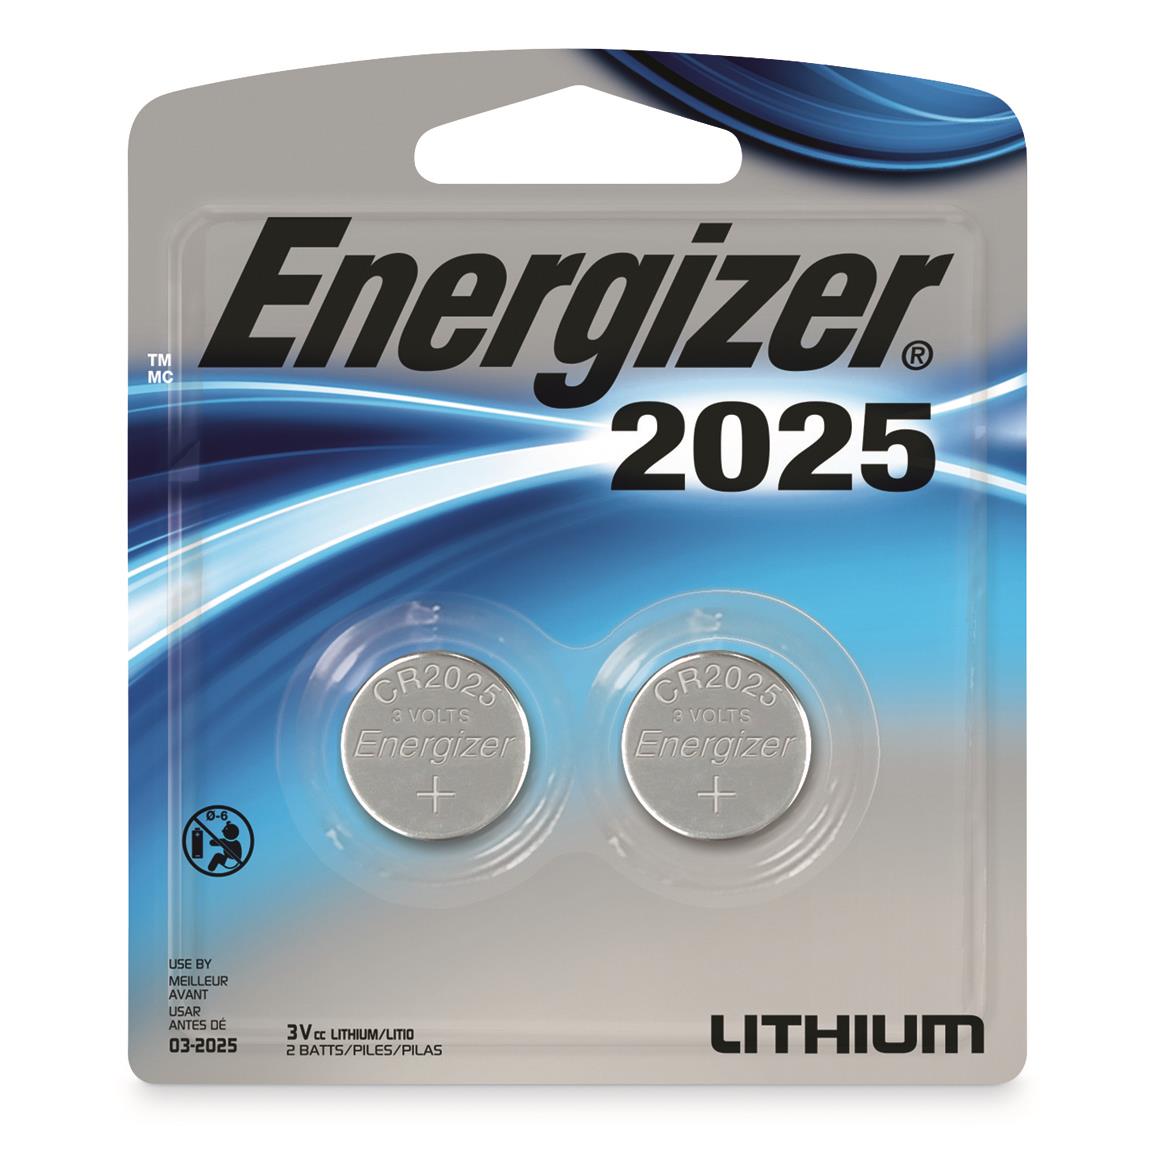 Energizer Lithium Coin 2025 Batteries, 2 Pack